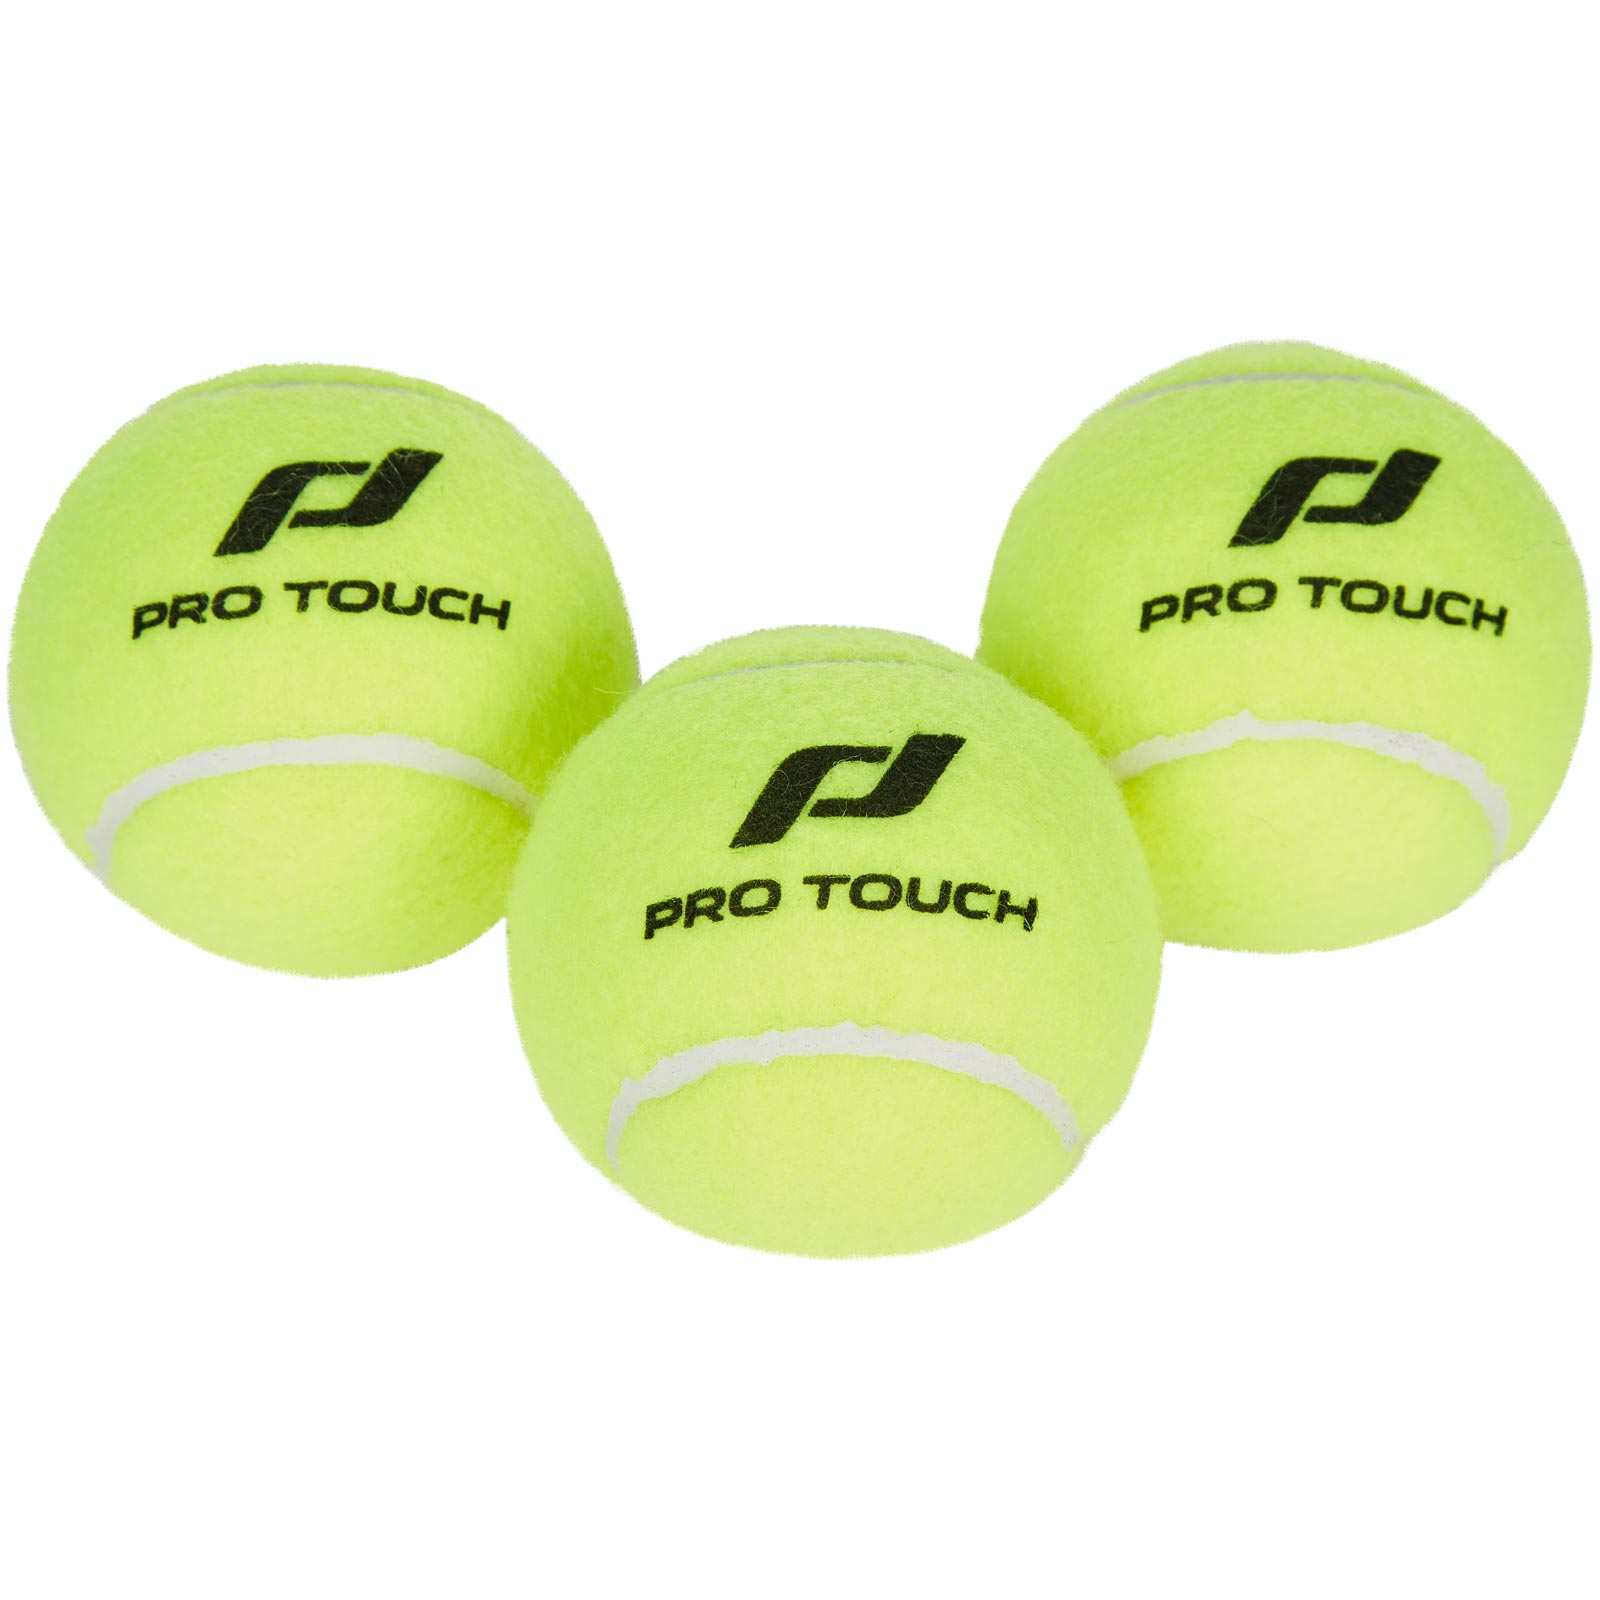 PRO TOUCH SPIN PADEL BALLS - 3PK